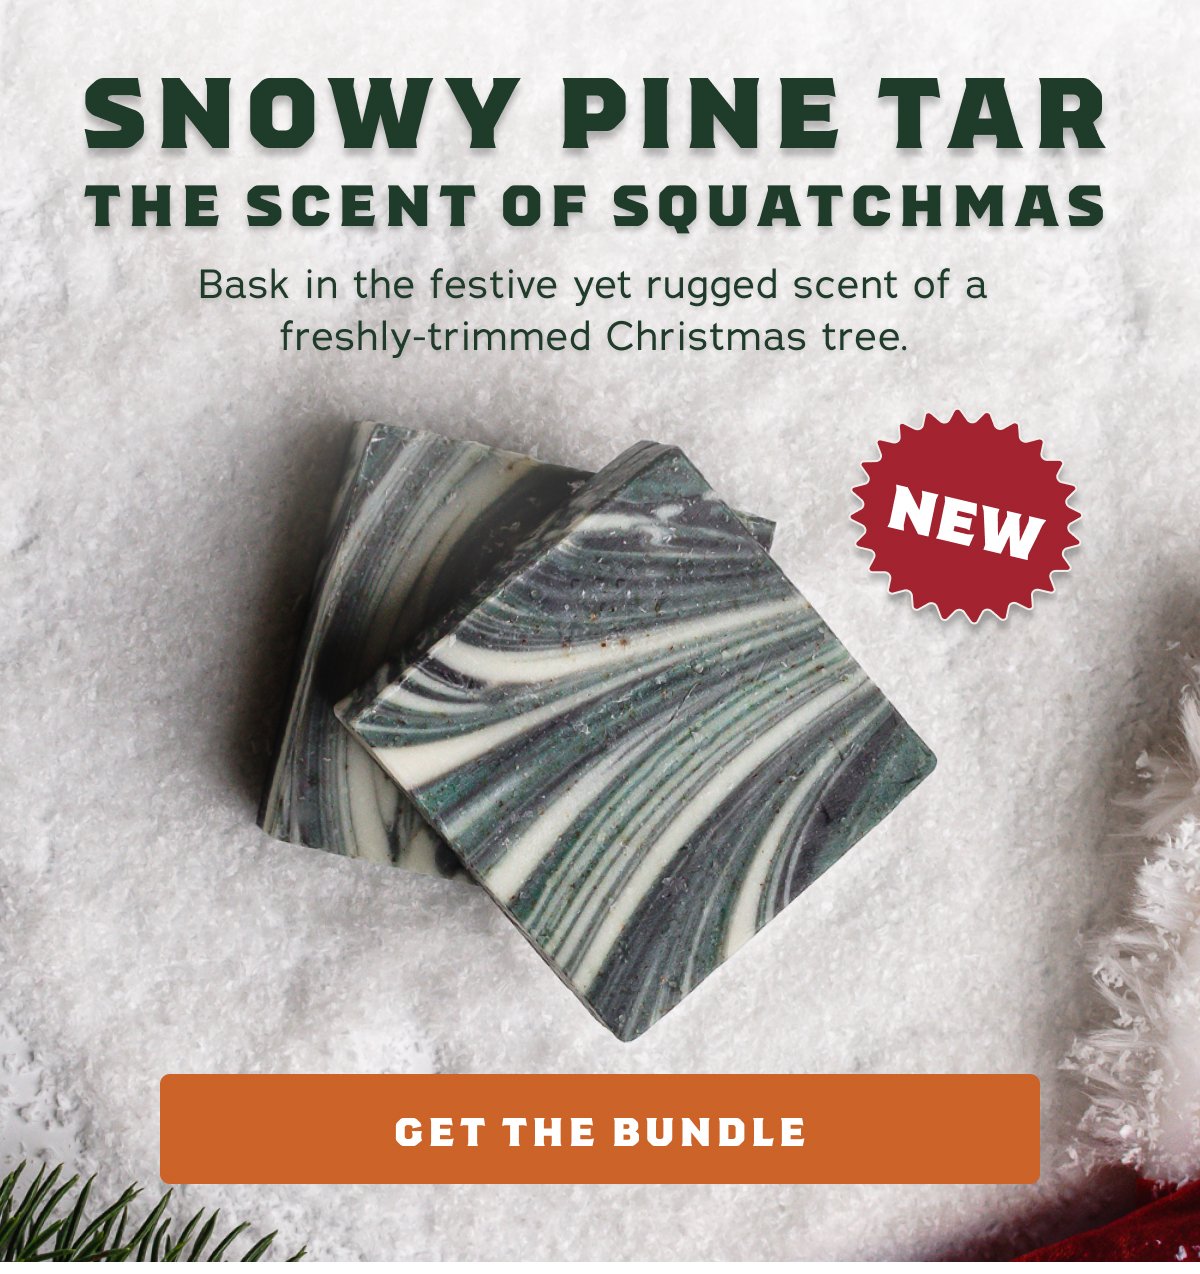 Dr. Squatch Snowy Pine Tar Limited Edition Soap- BRAND NEW